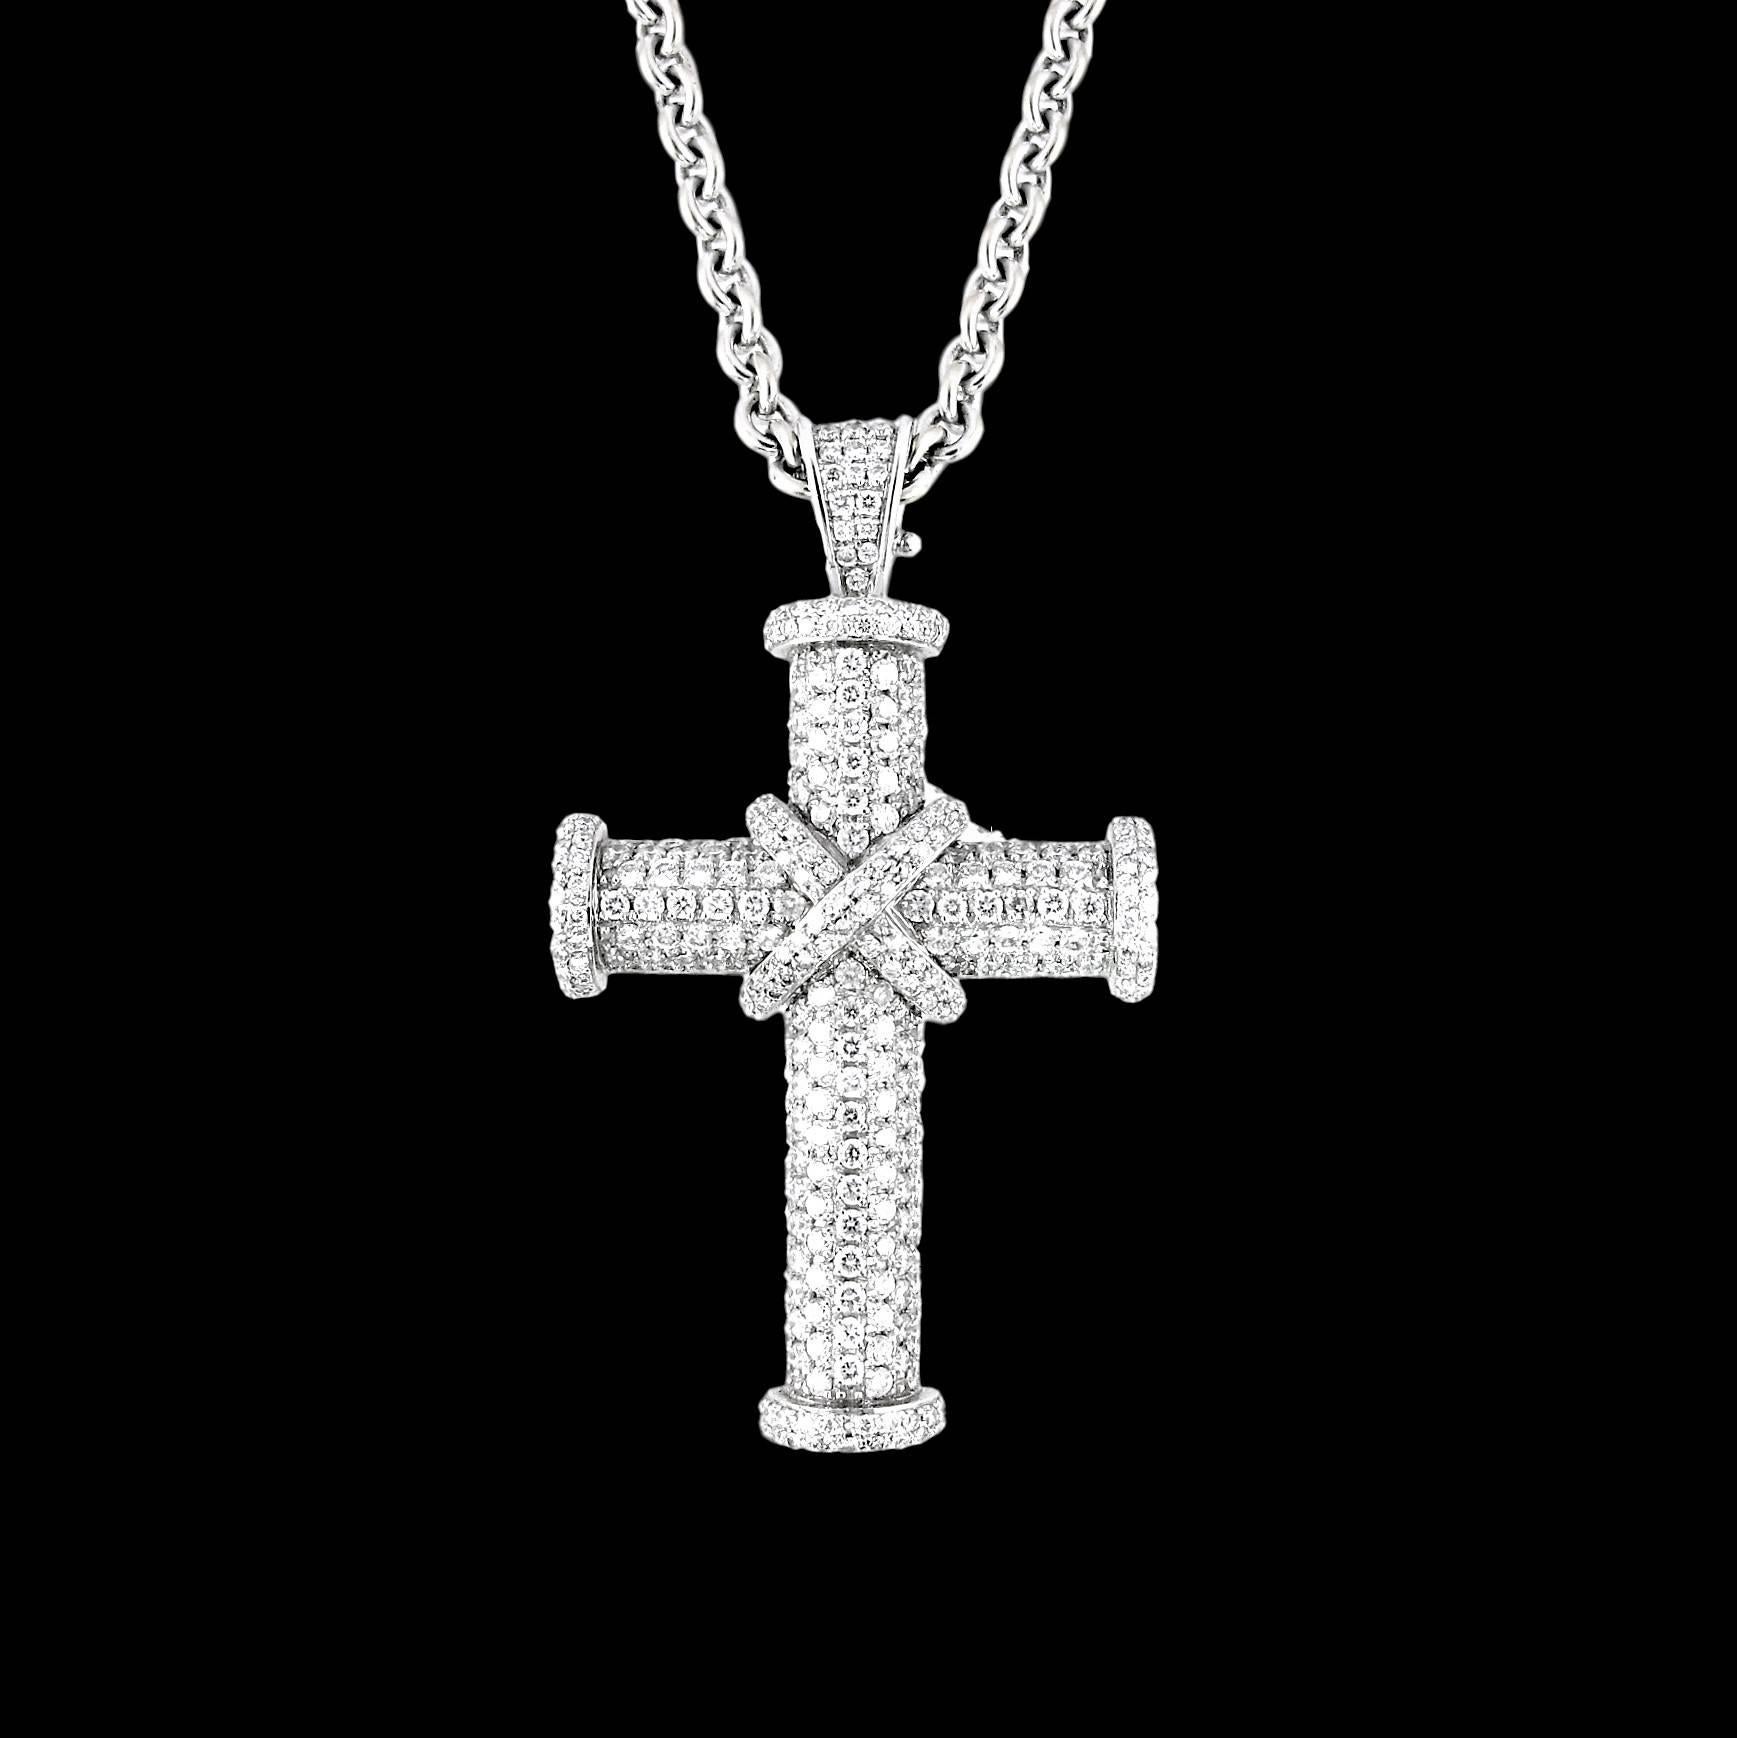 This cross pendant has been hand fashioned in the Theo Fennell London Flagship Store out of 18ct white gold with full diamond pavé.
Theo has said; 